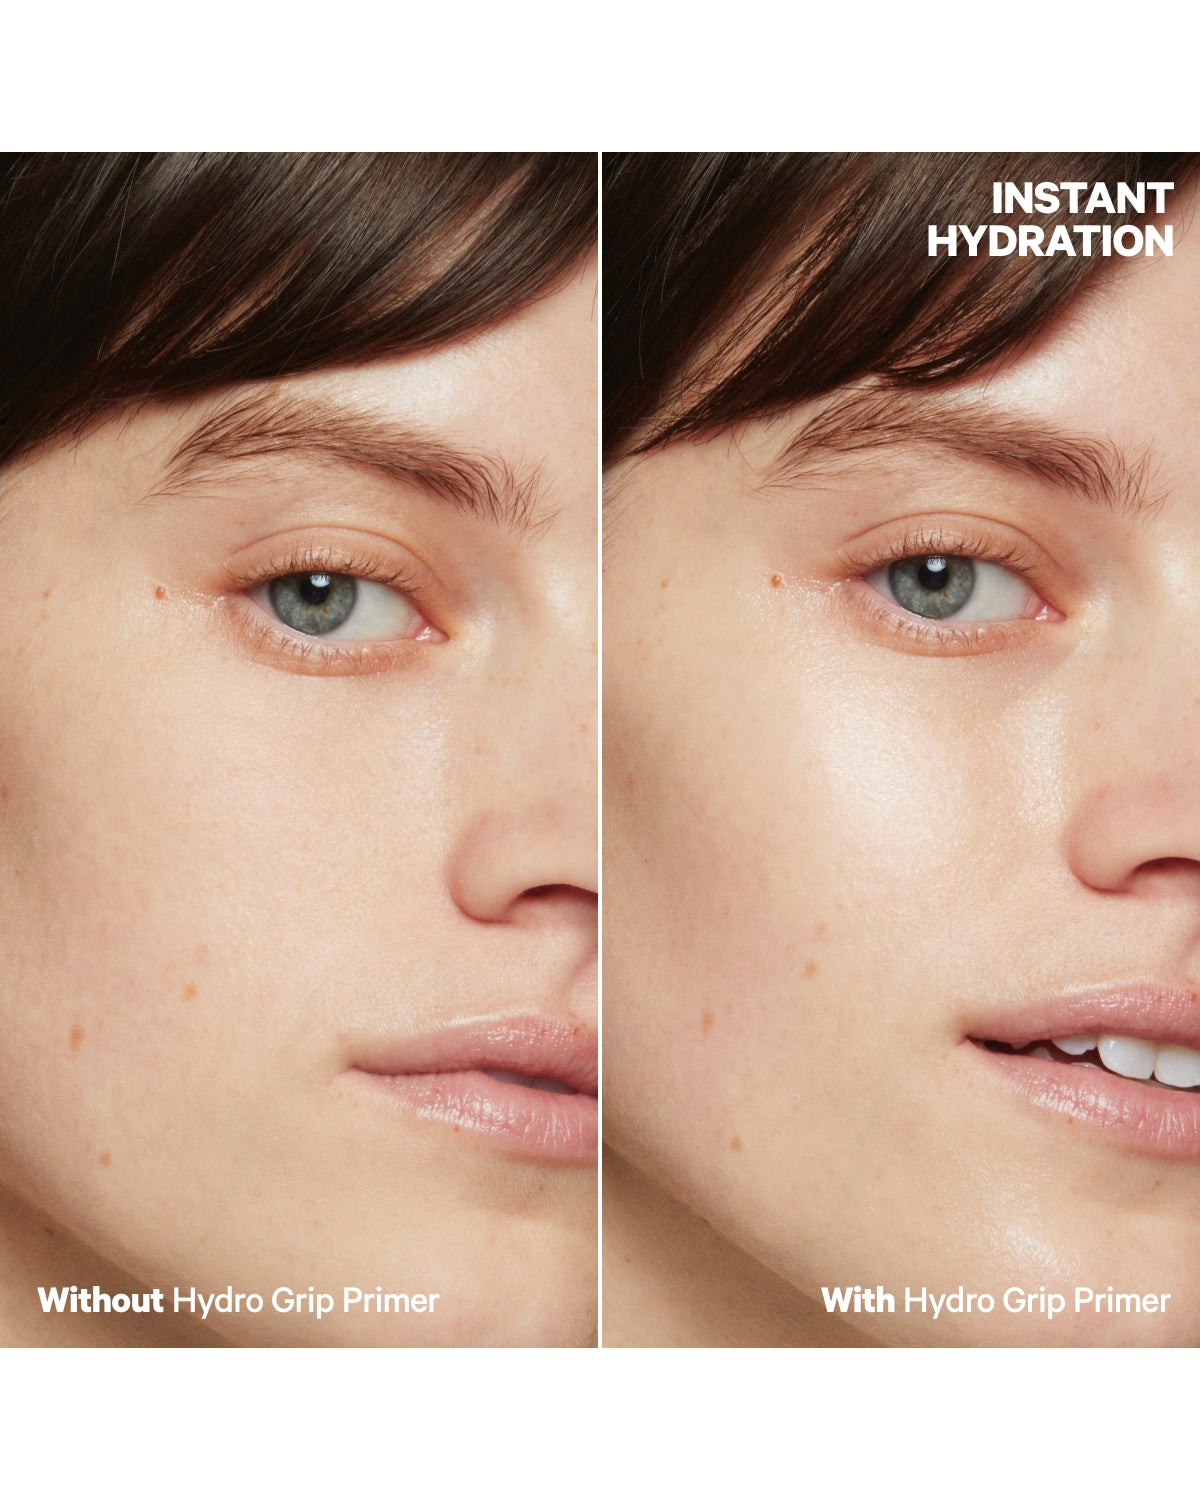 Hydro Grip Primer Before and After 2 | Milk Makeup